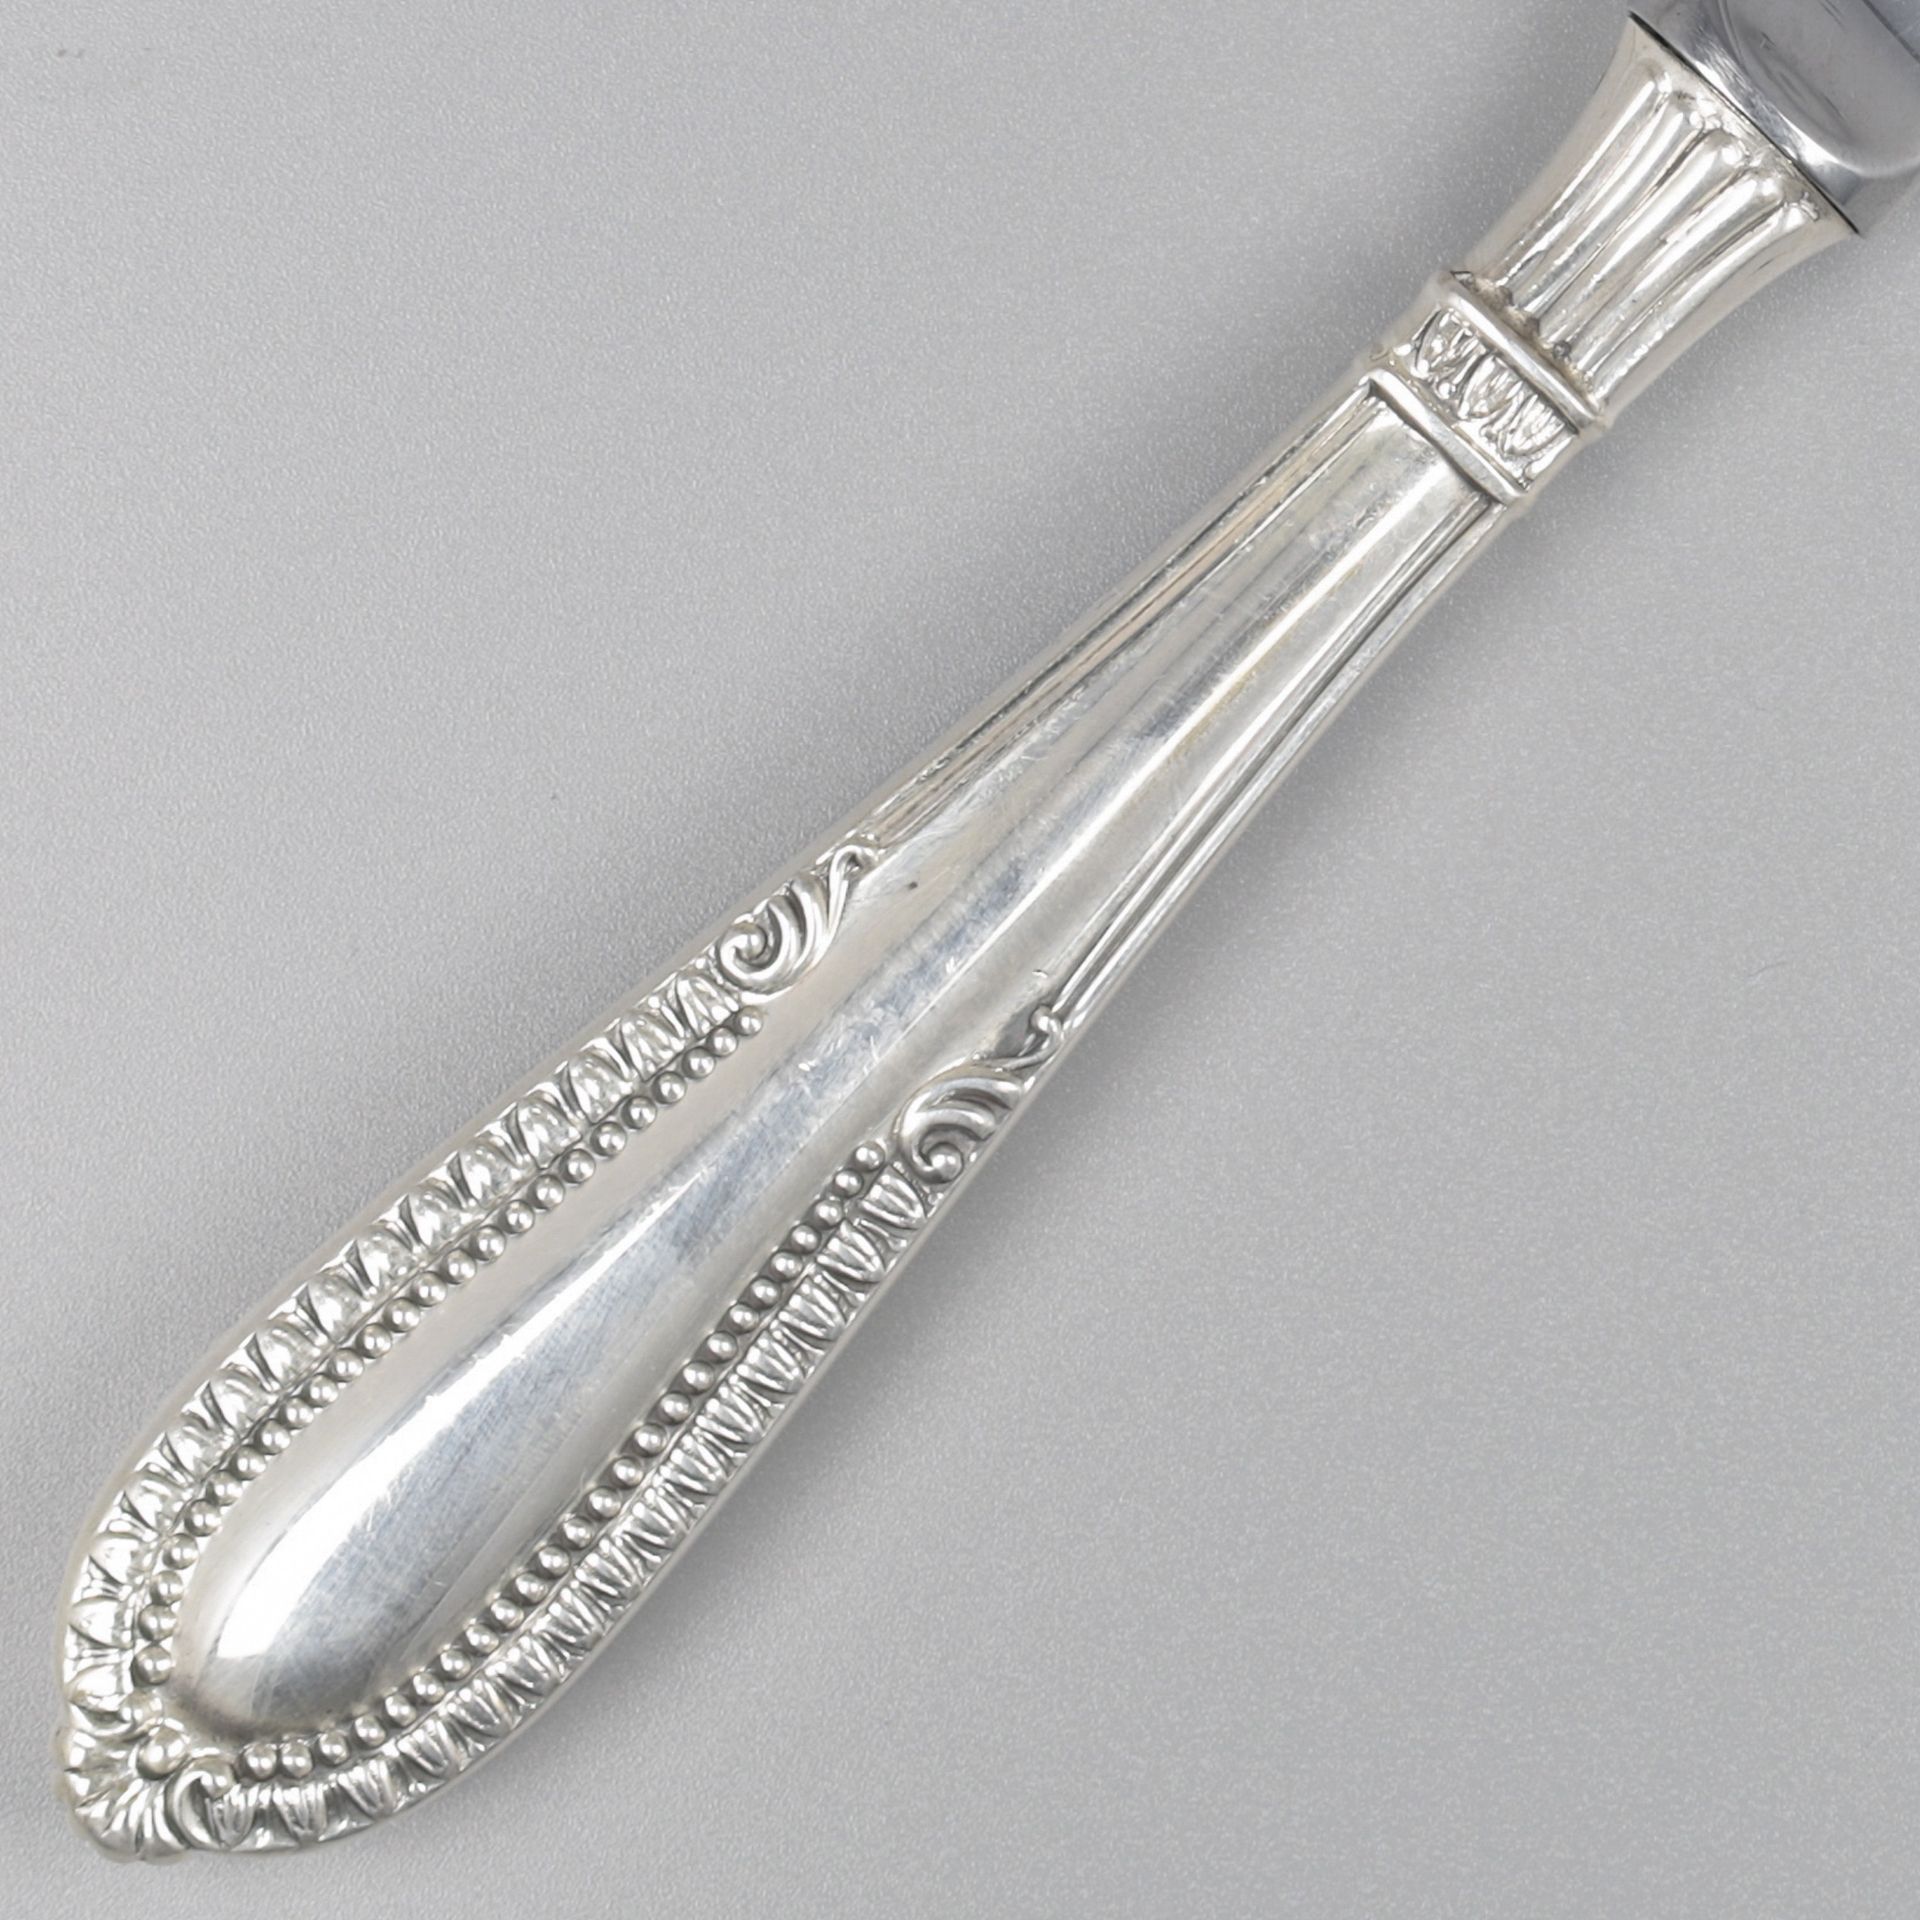 No reserve - 6-piece set of dinner knives, model Grand Paris, silver. - Image 4 of 6